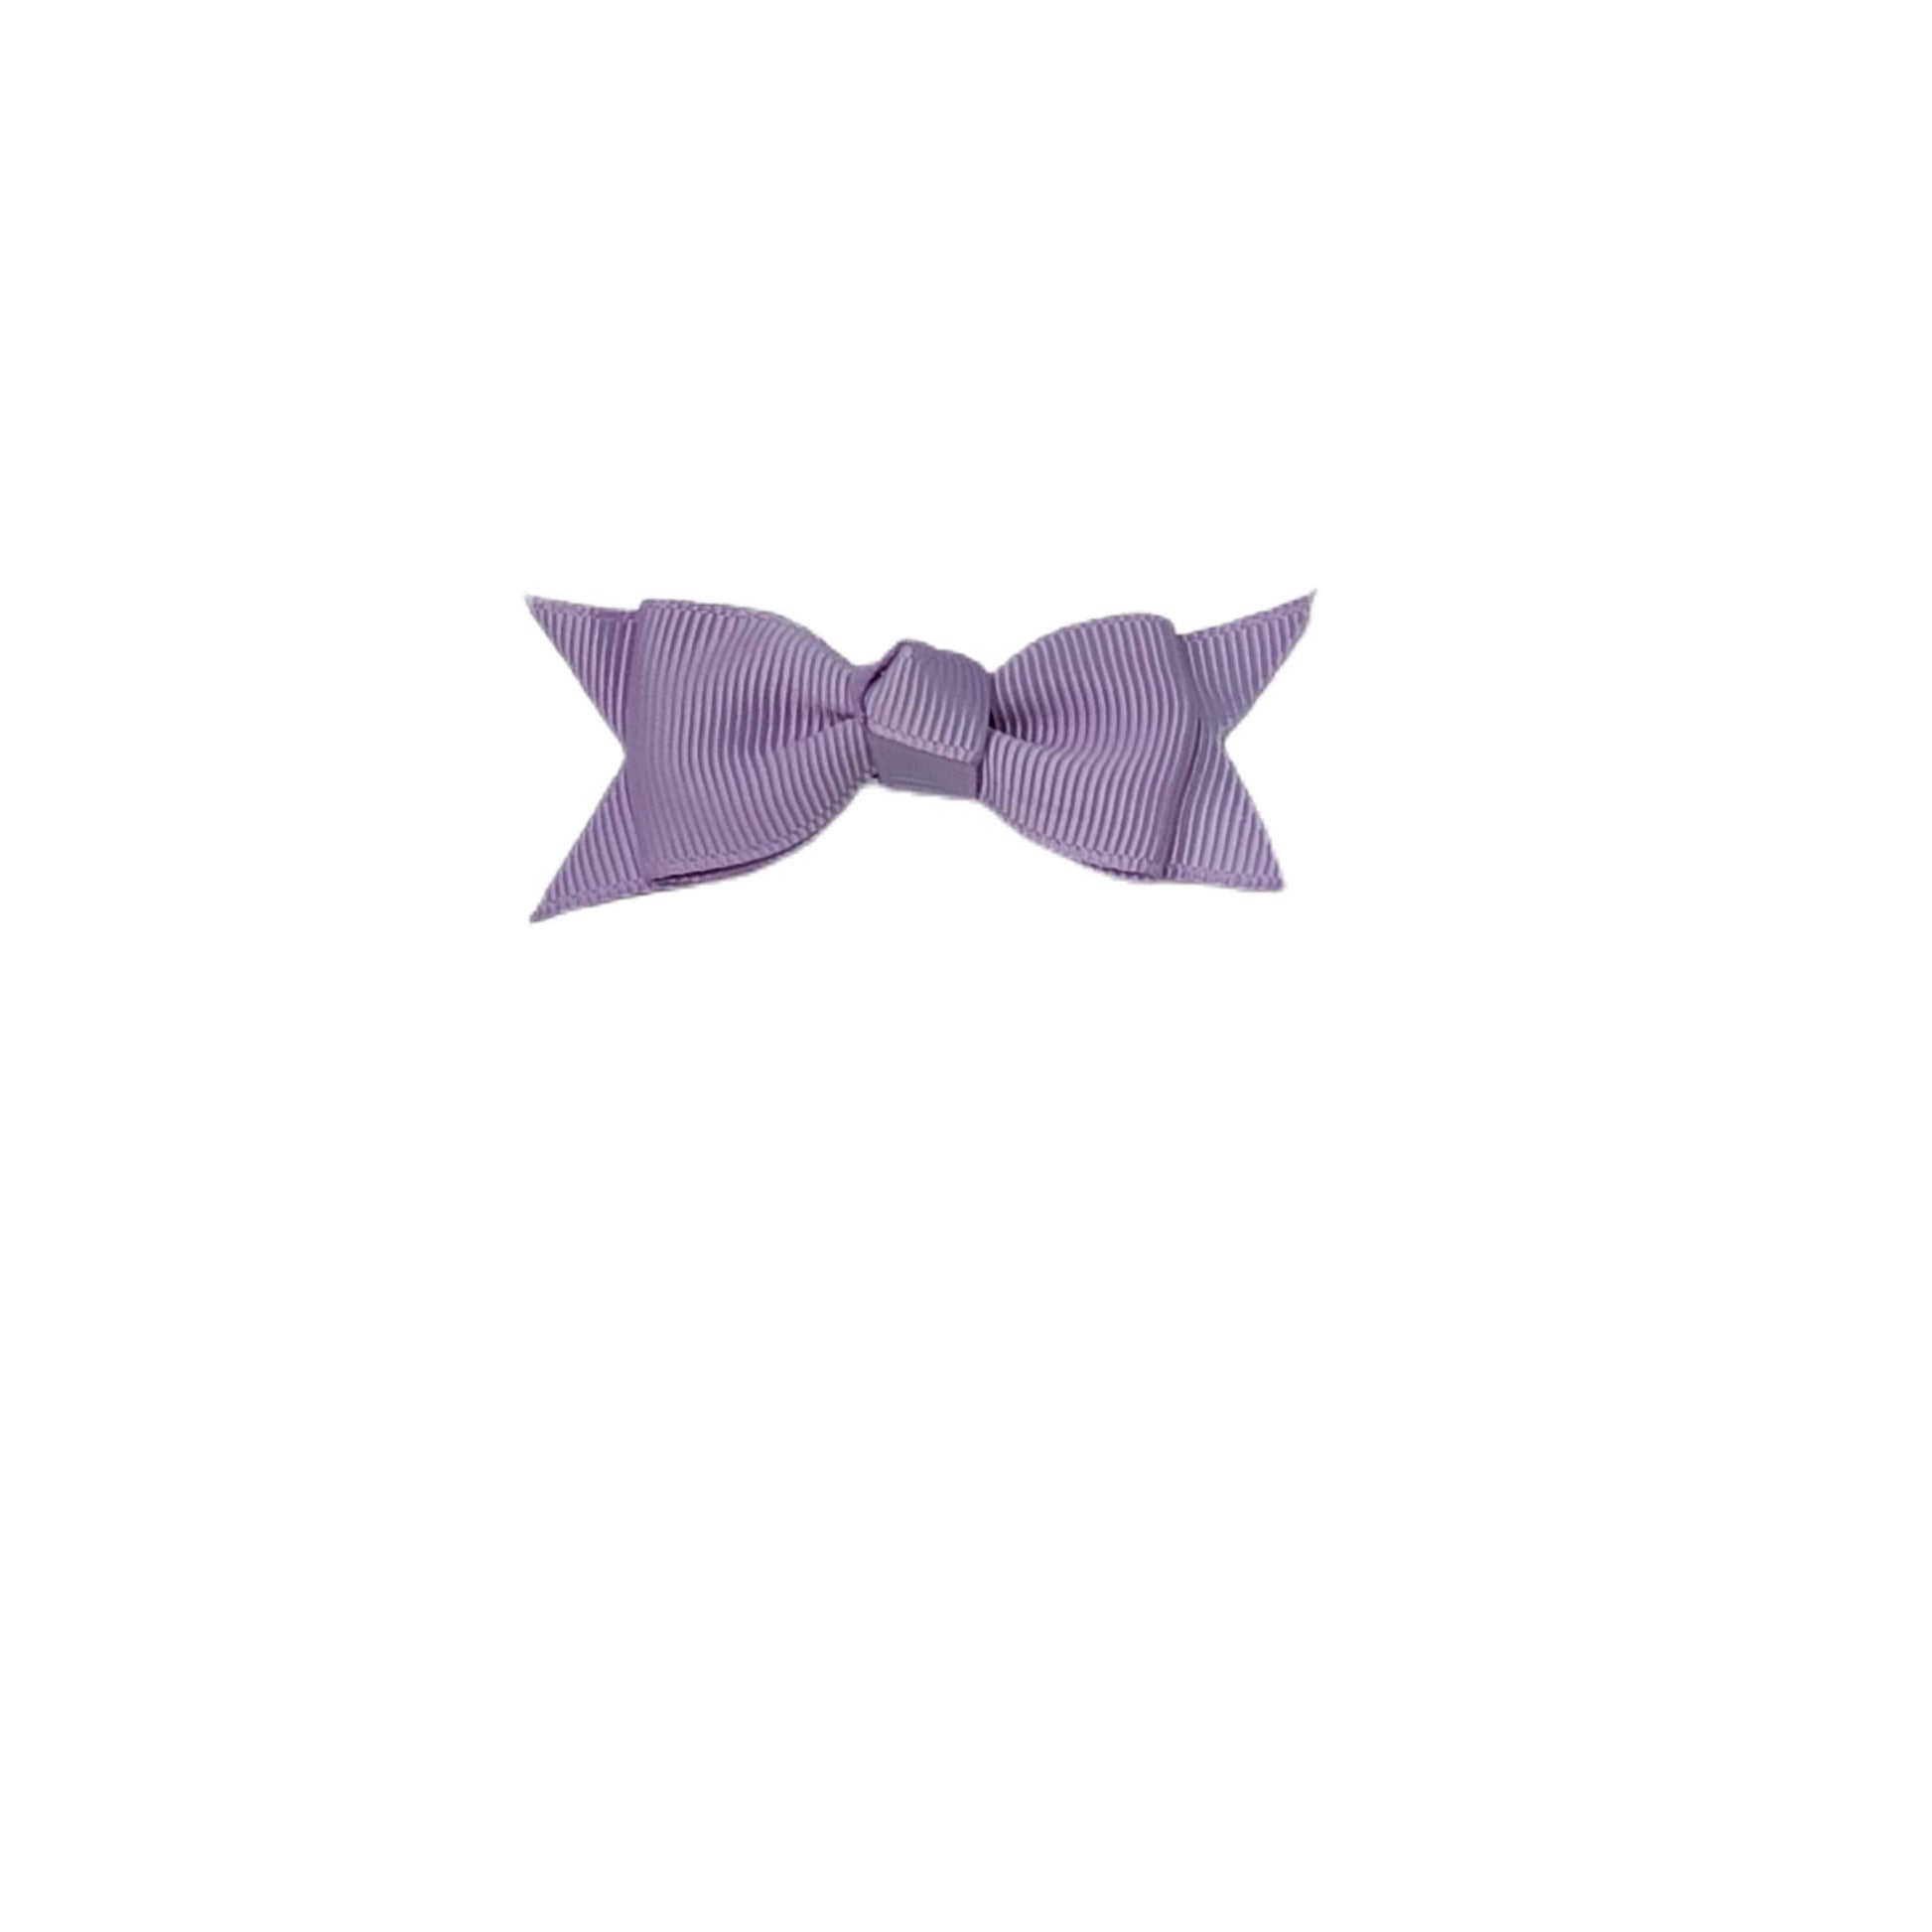 Itty Bitty Knotted Ribbon Bow 2.5" - Waterfall Wishes